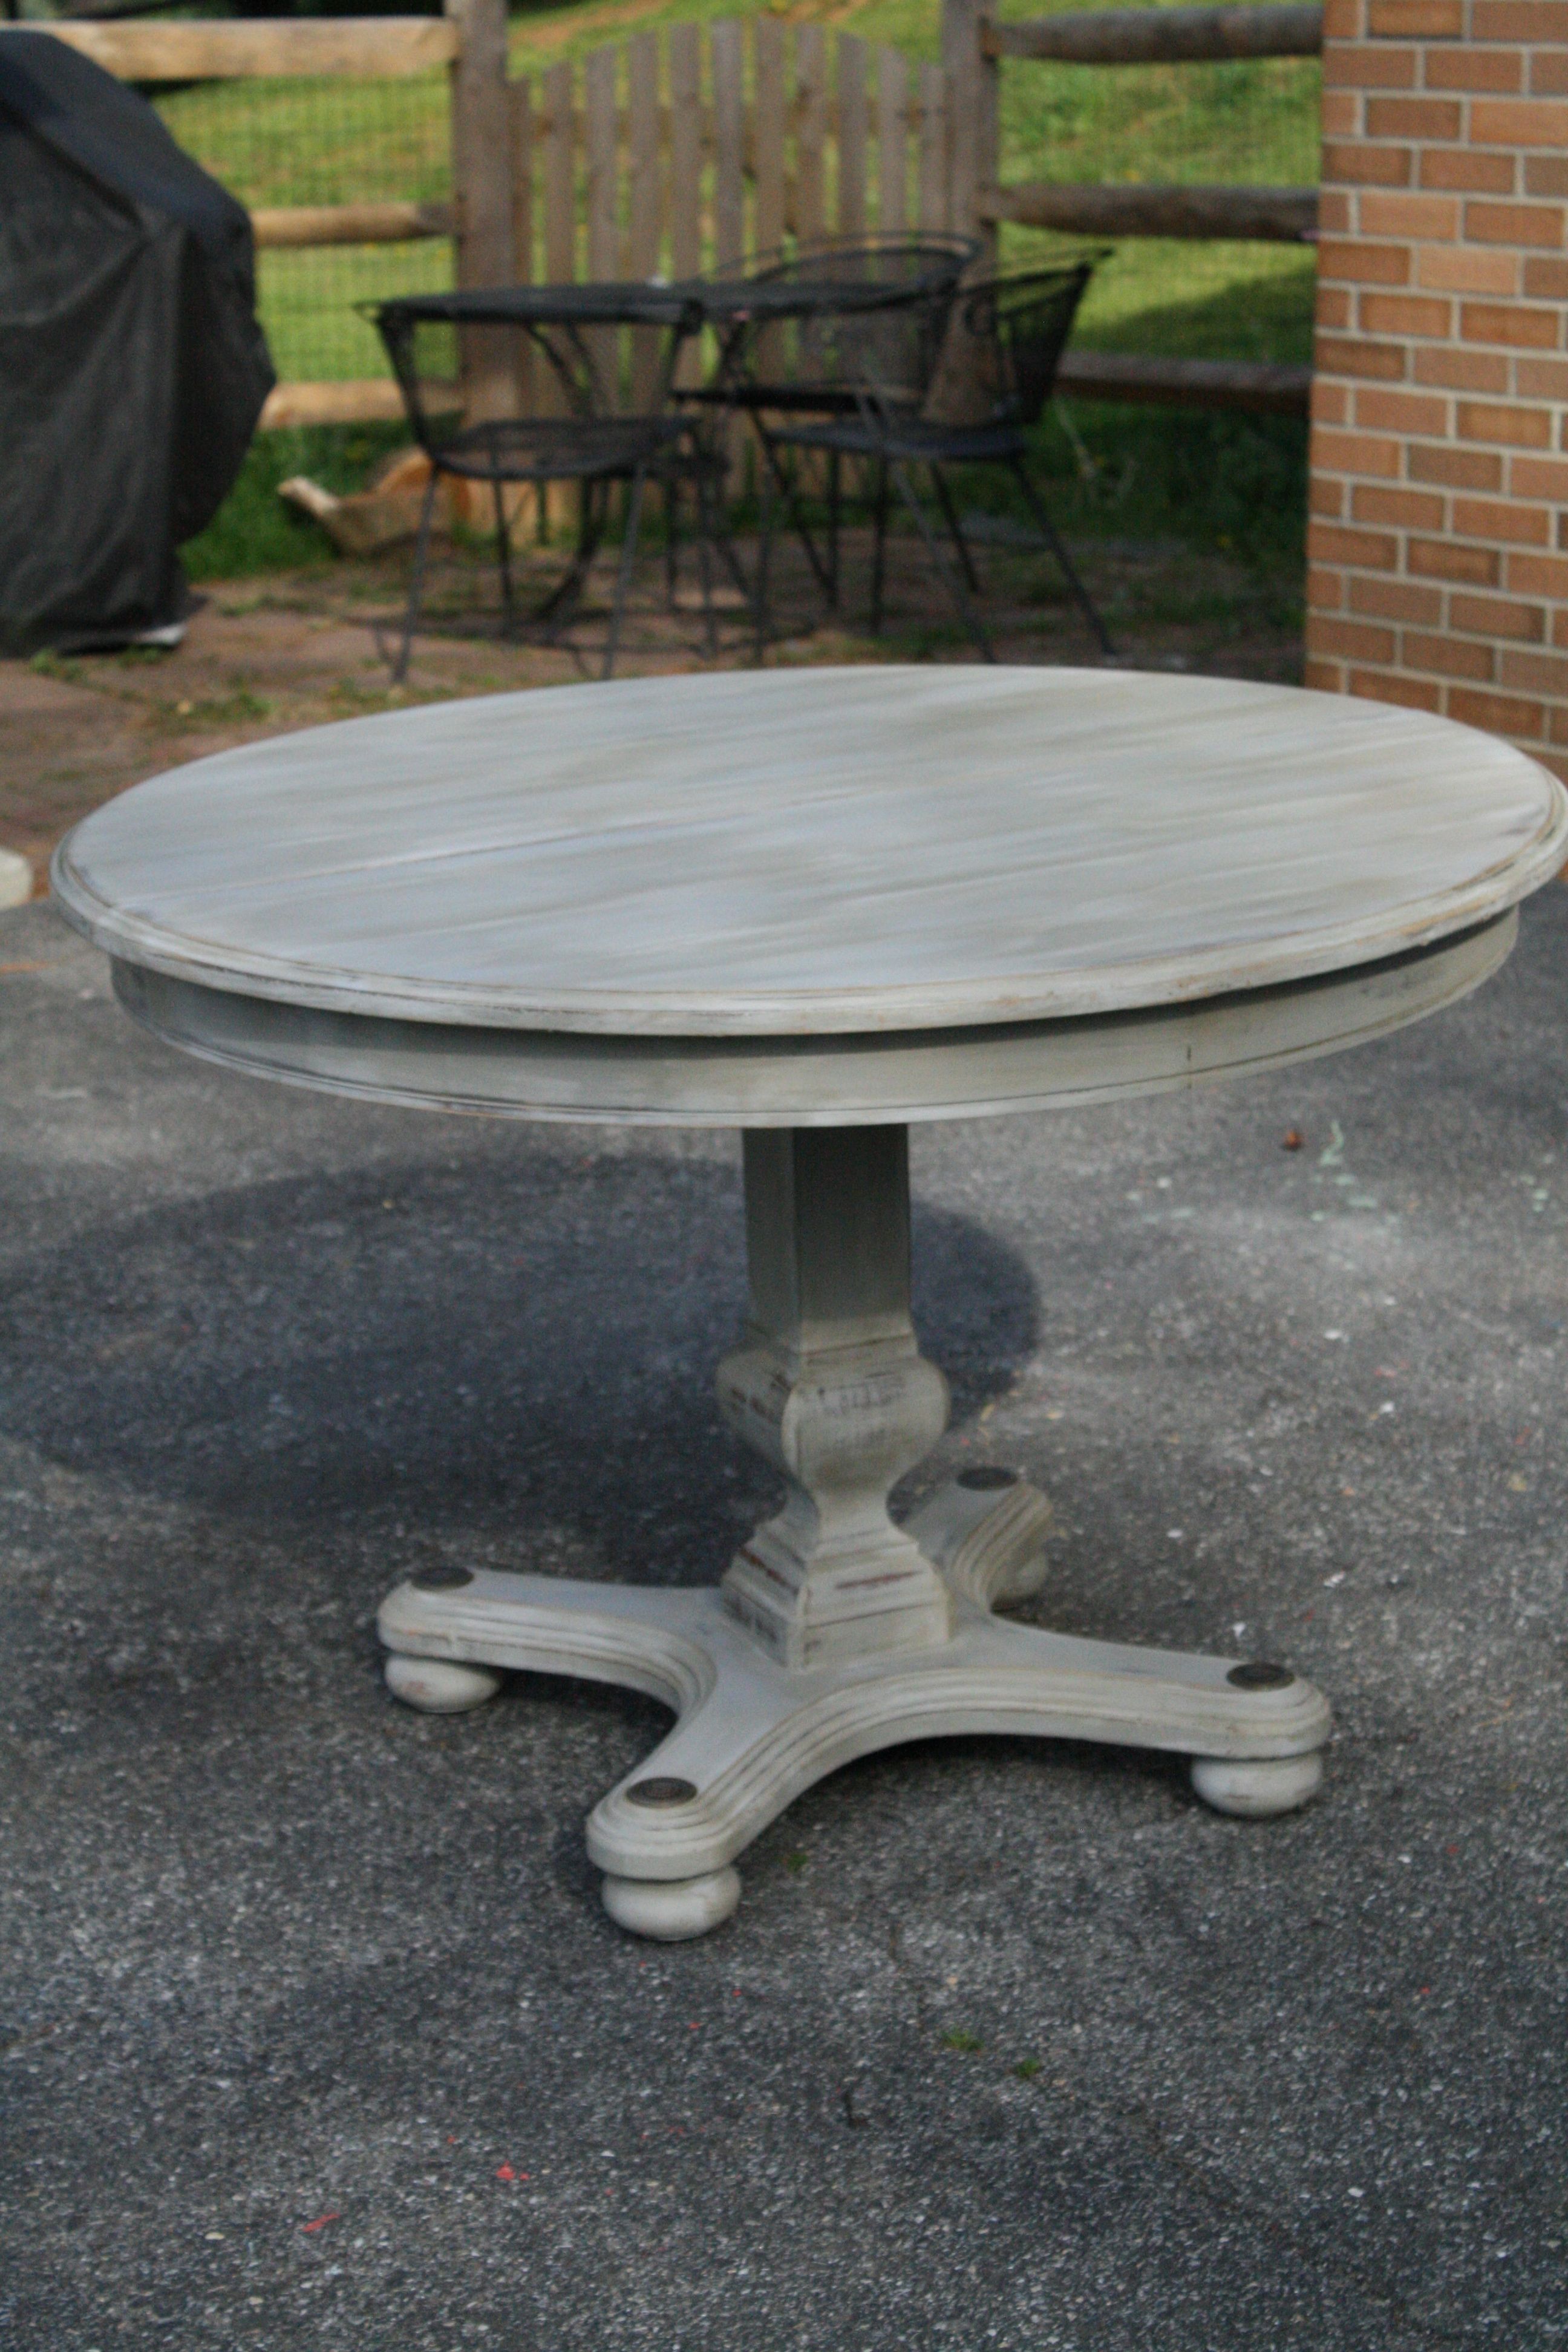 Weathered Paris Gray Dining Table | Furniture | Pinterest For Most Up To Date Washed Old Oak & Waxed Black Legs Bar Tables (View 11 of 20)